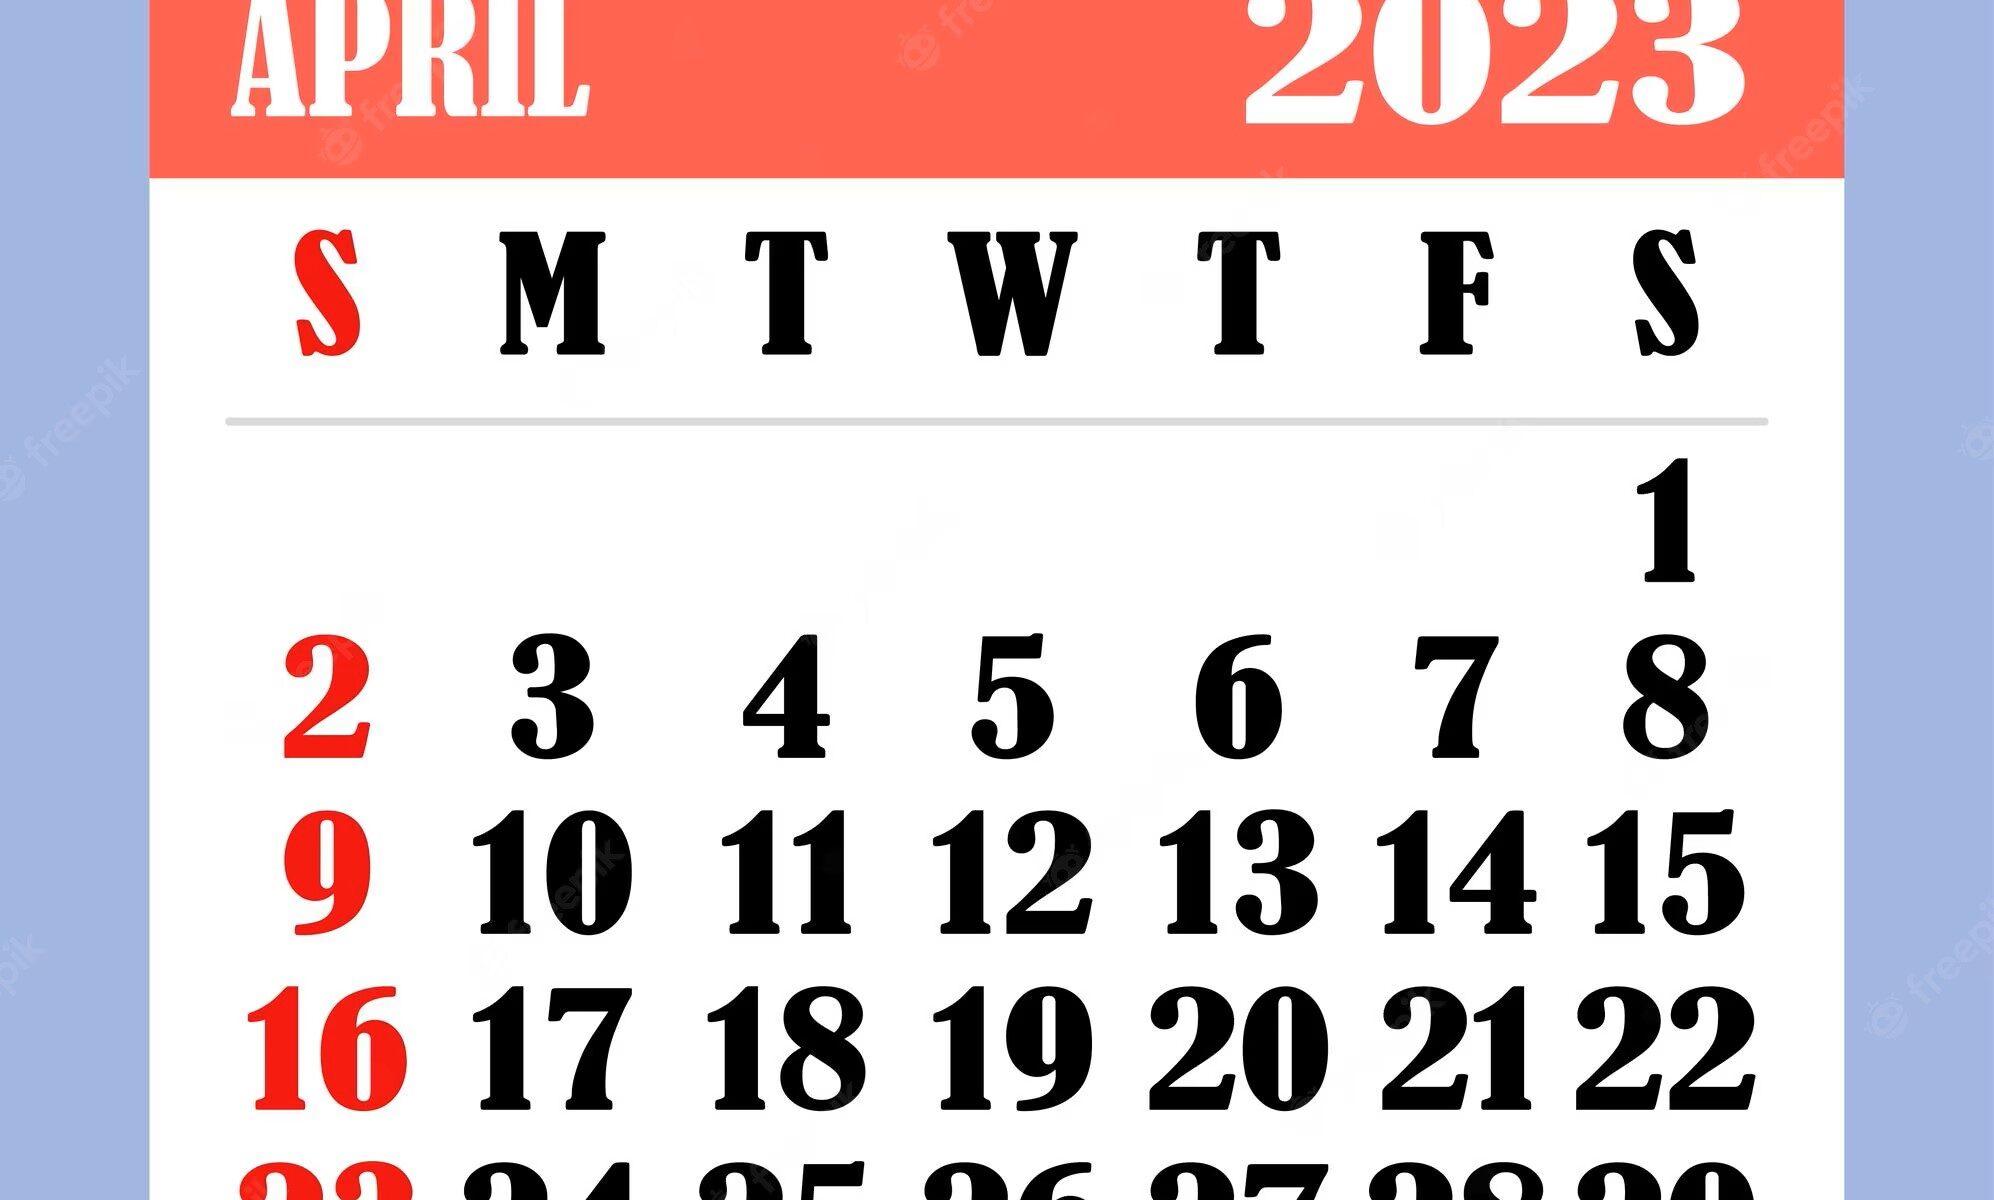 What is trending in April 2023